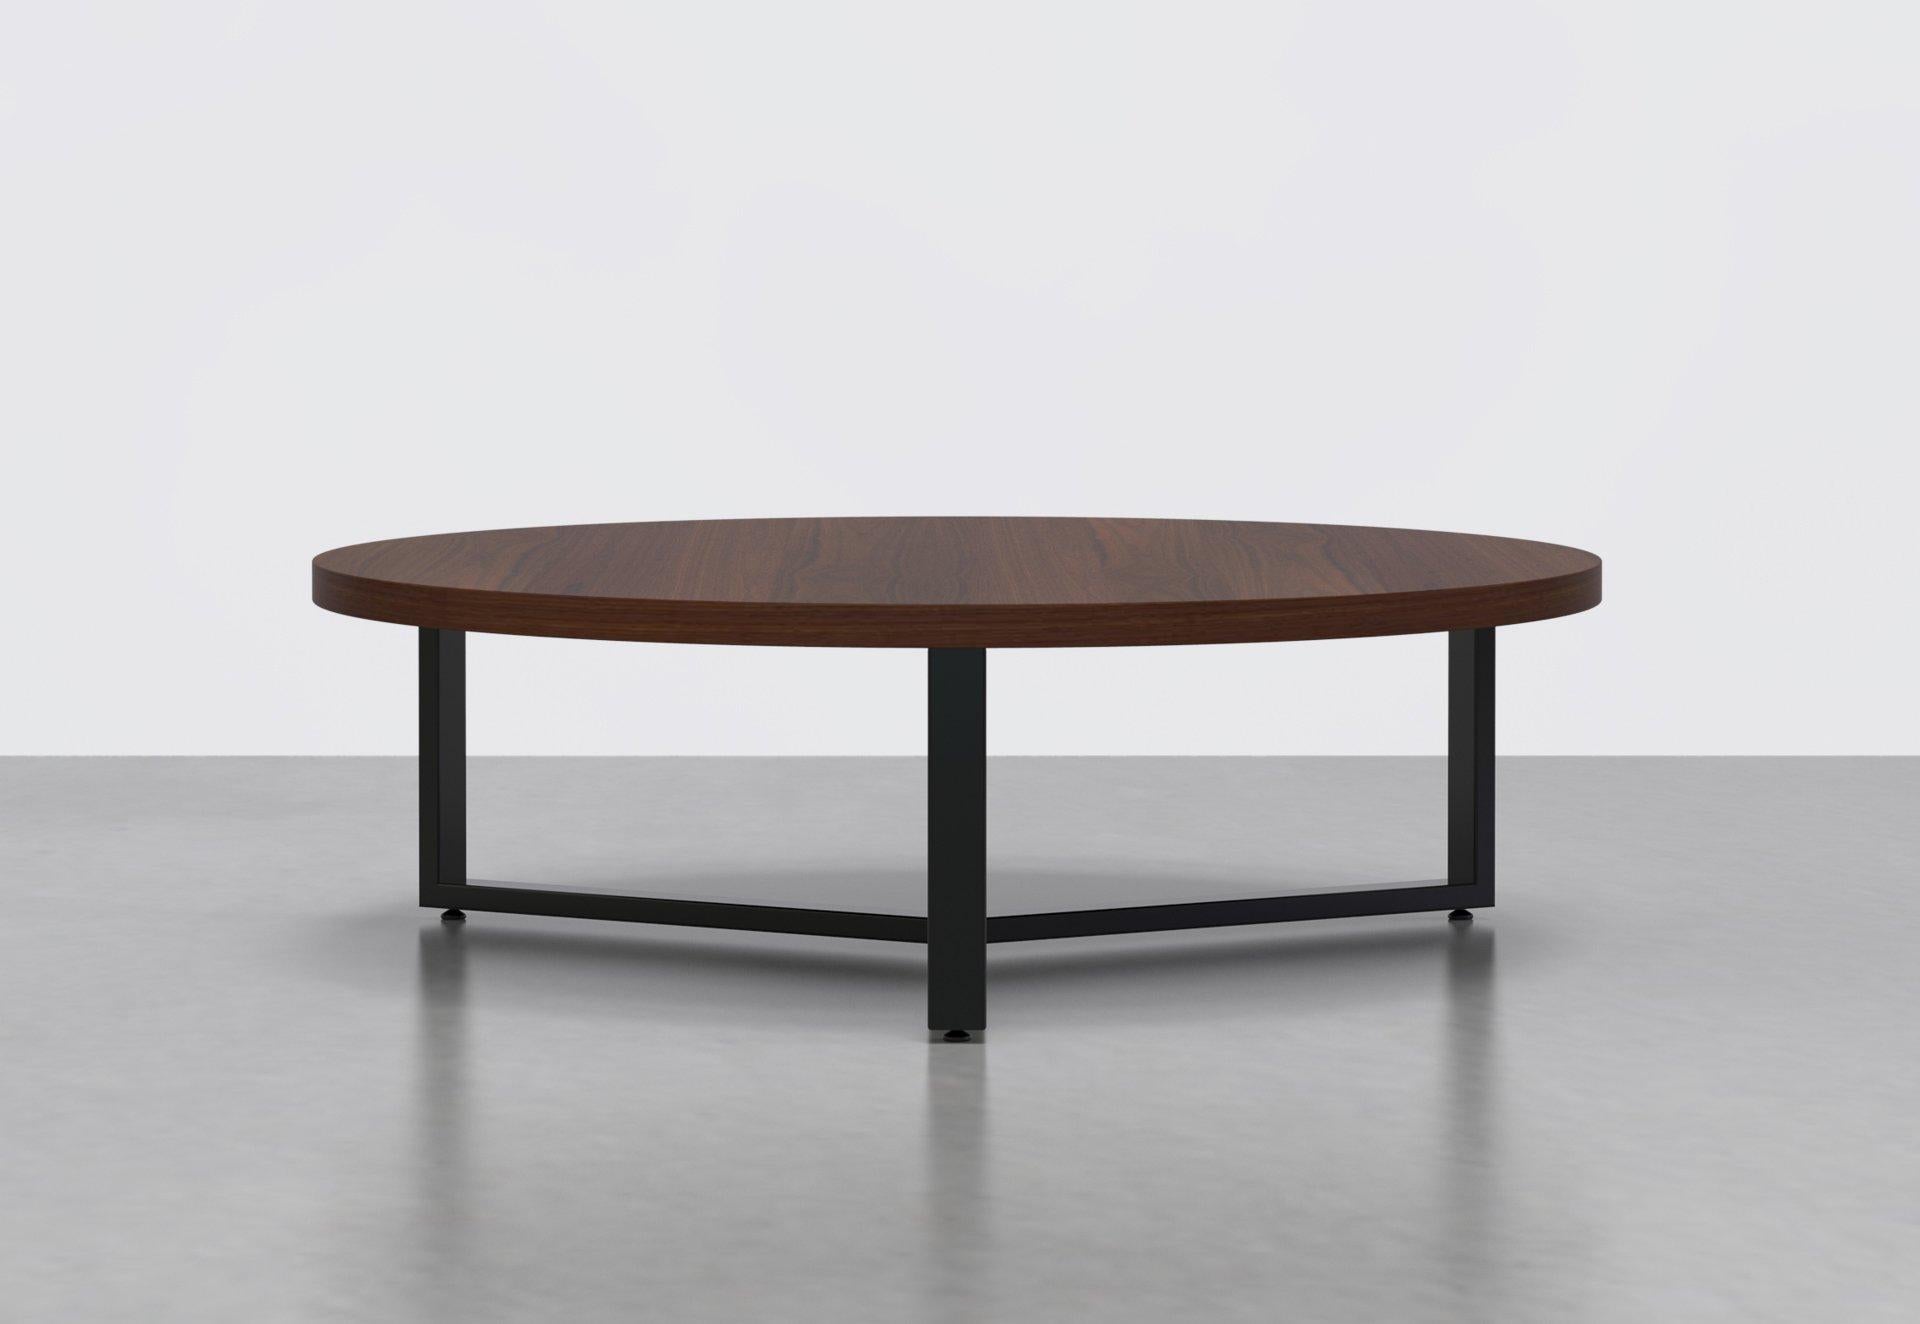 Simplicity and sophistication in one. The Anchor coffee table's essential powder-coated steel base supports a durable round veneer top.